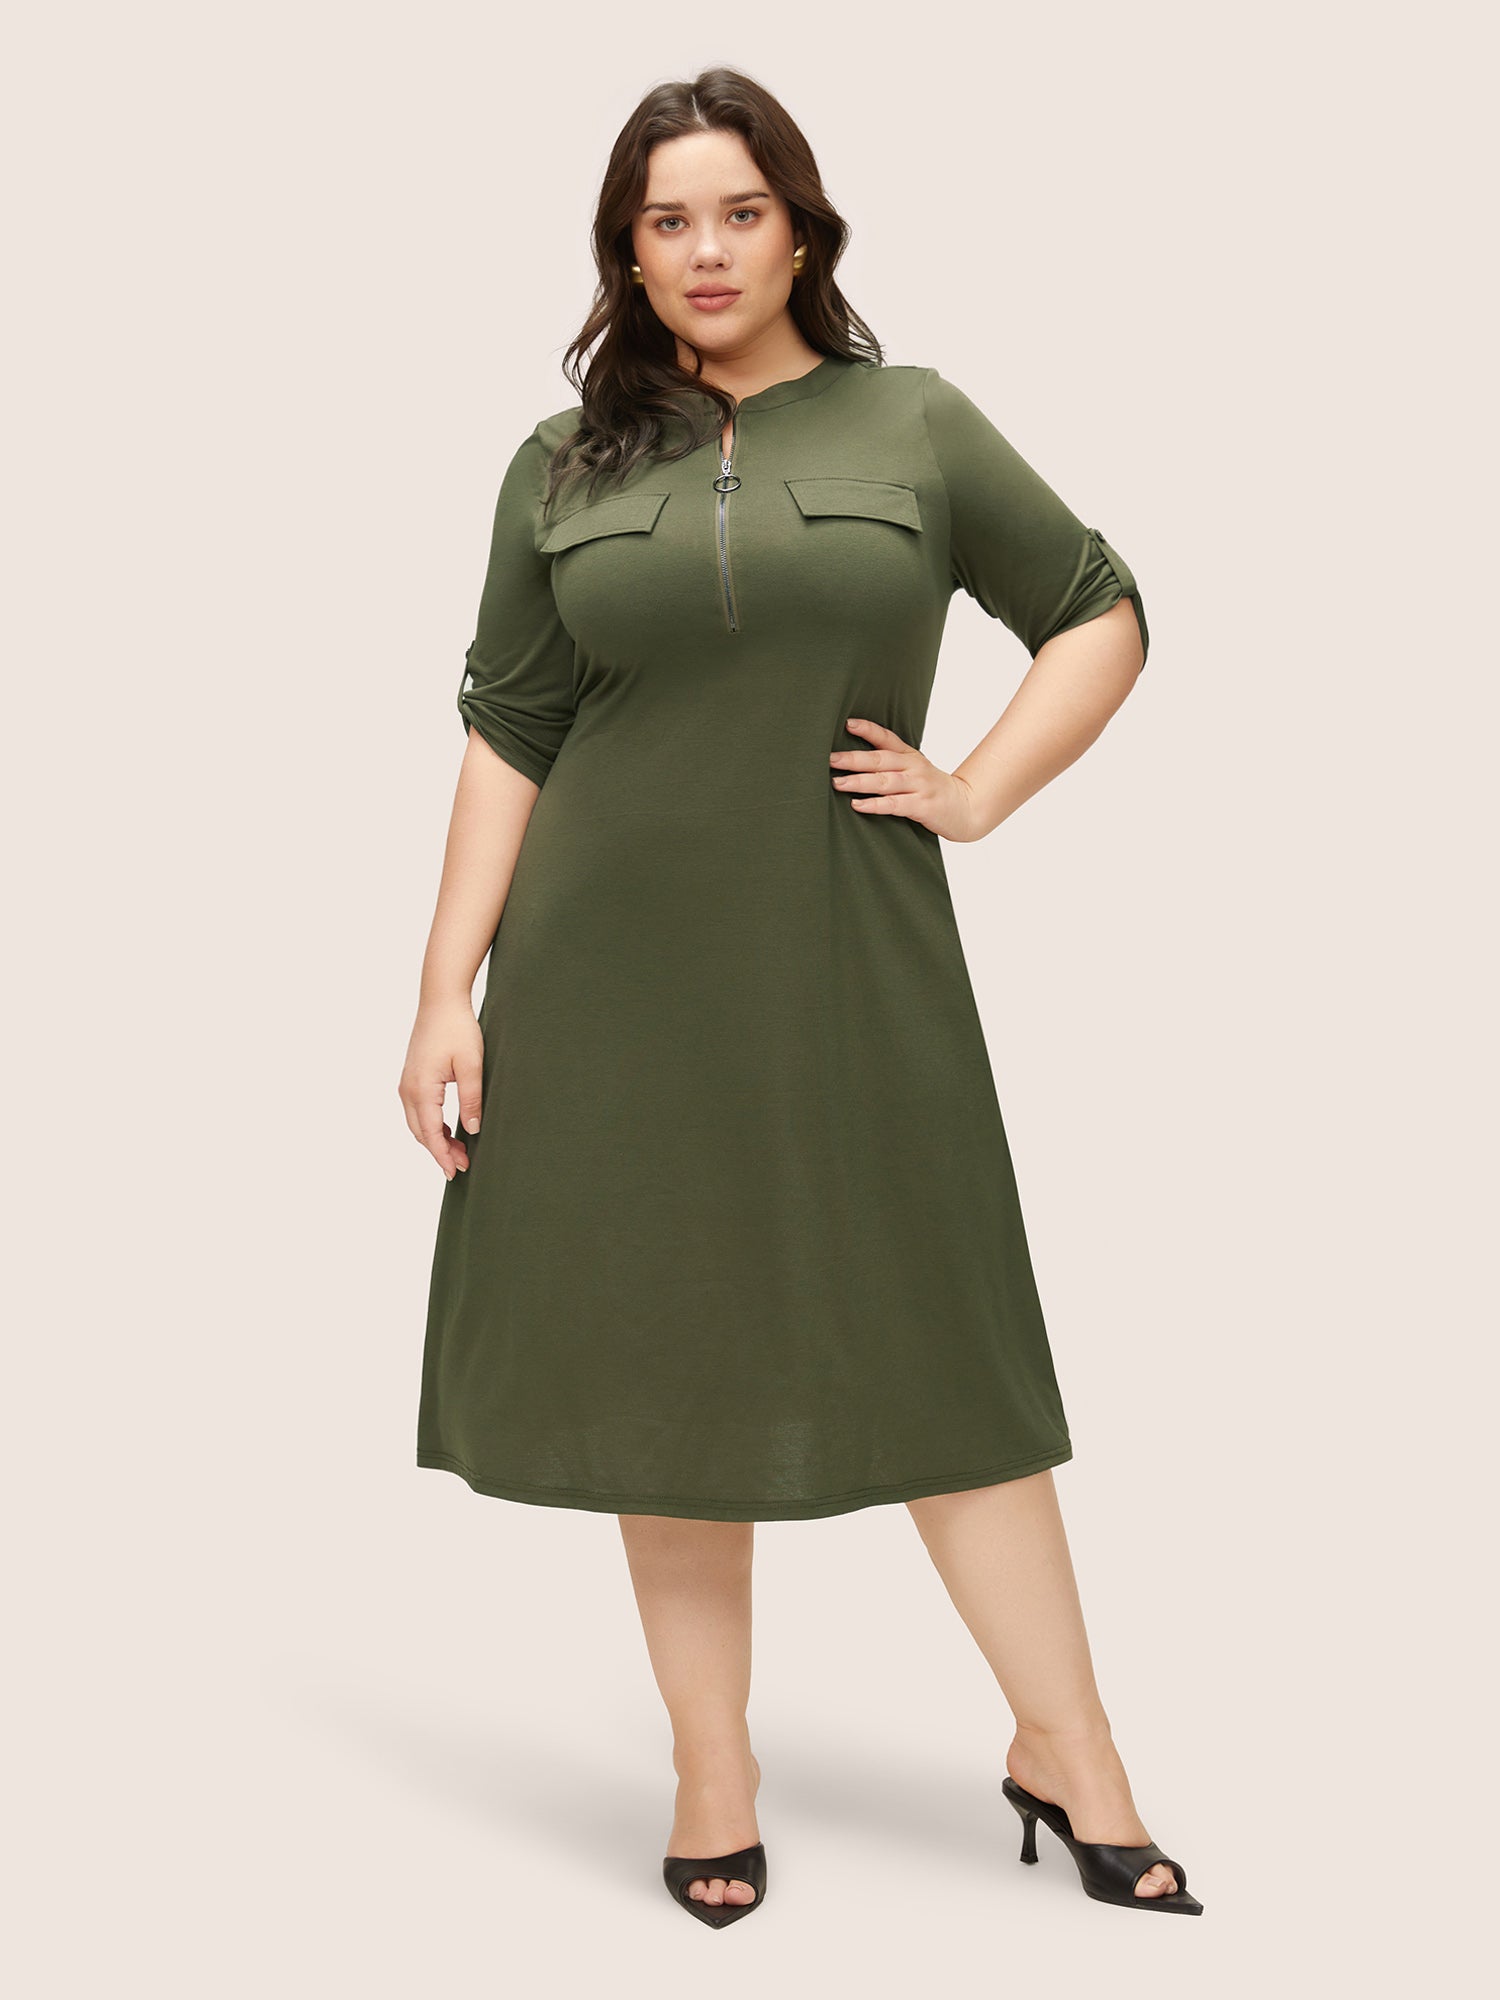 

Plus Size Women Work Plain Non Regular Sleeve Elbow-length sleeve Notched collar Pocket At the Office Dresses BloomChic, Army green